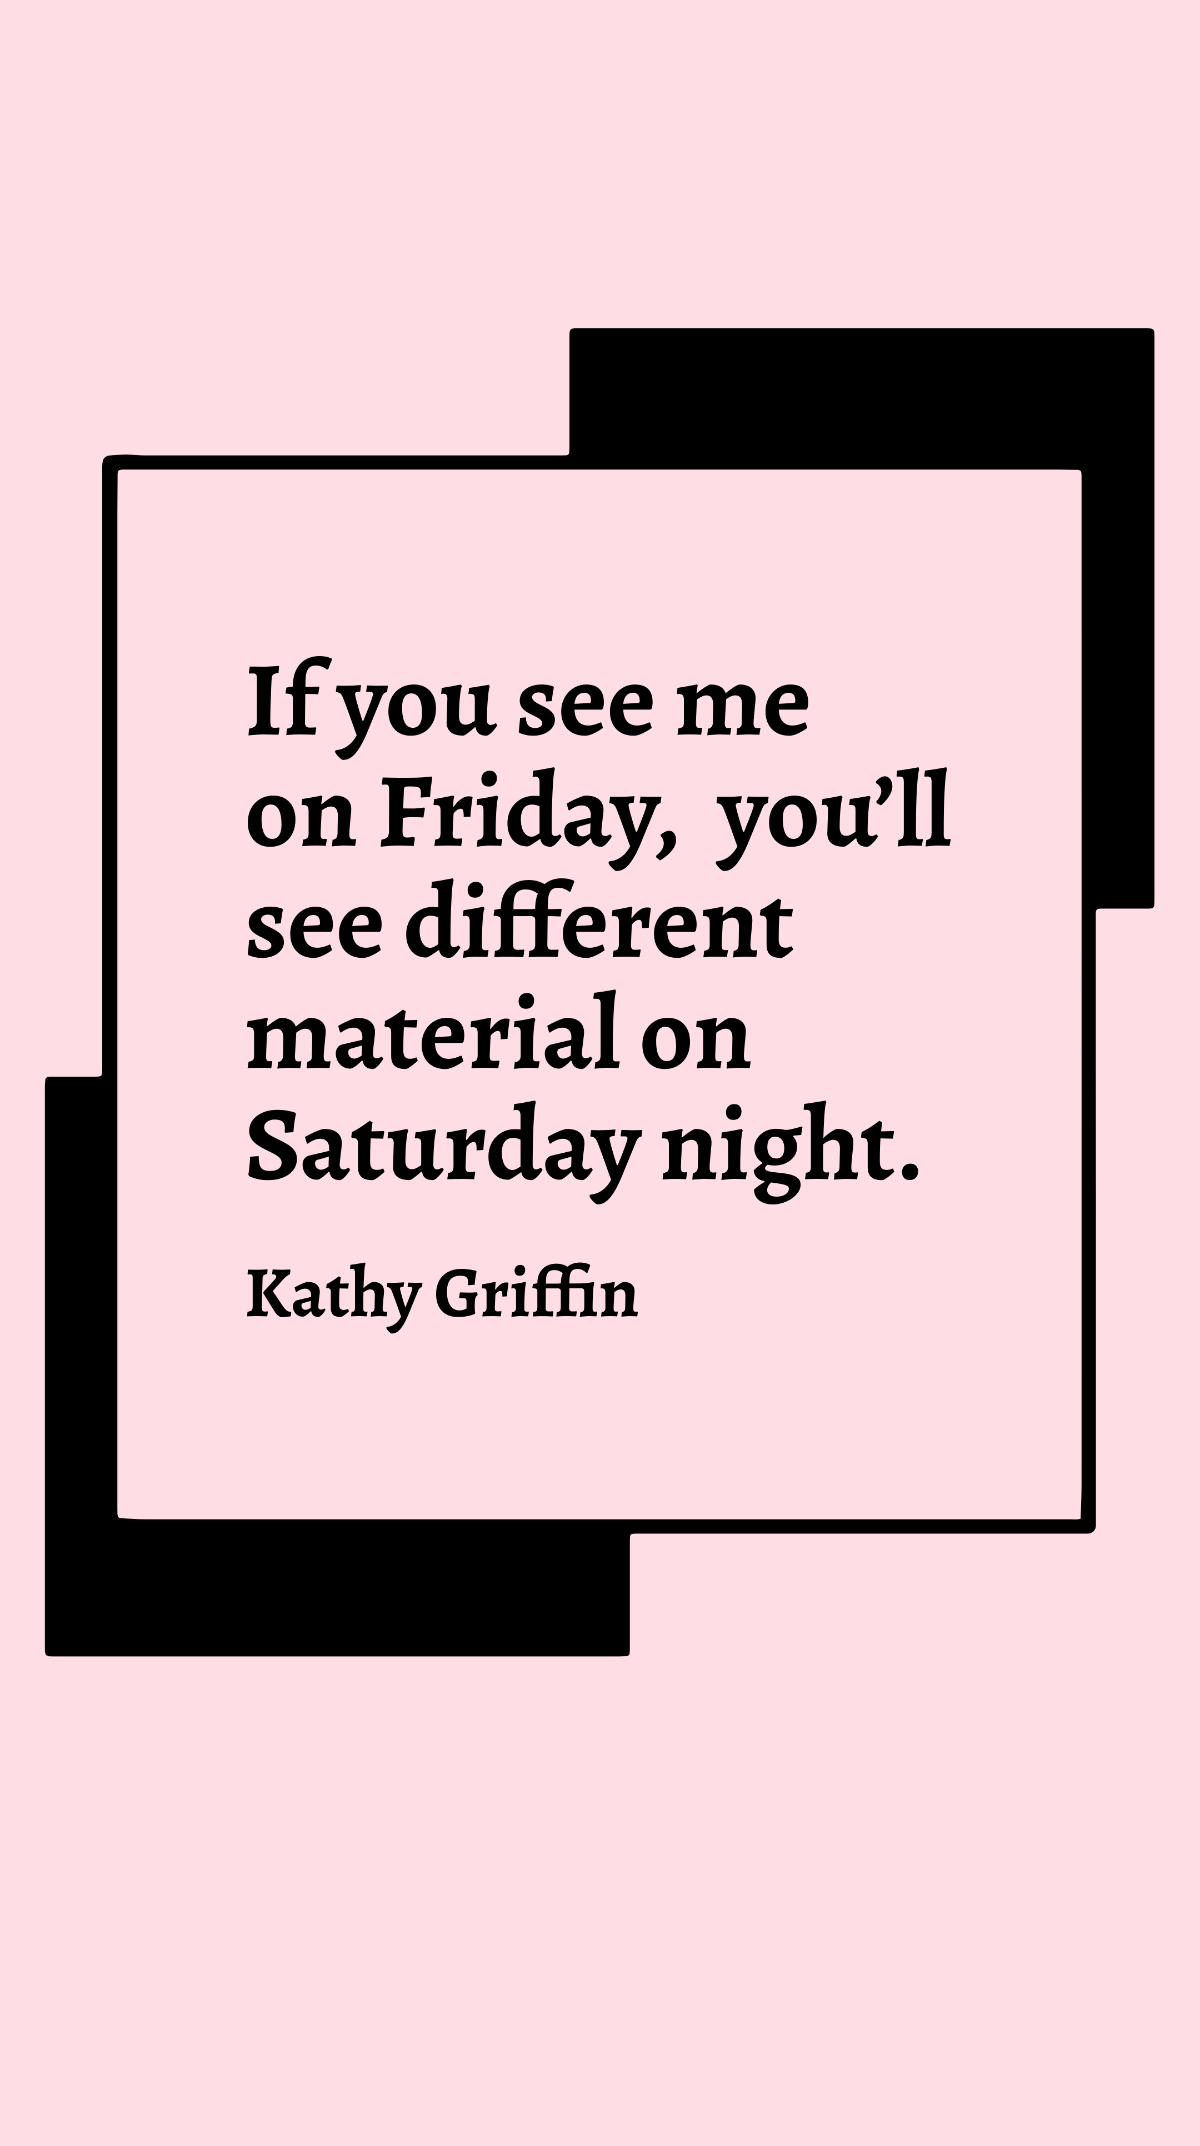 Kathy Griffin - If you see me on Friday, you’ll see different material on Saturday night. Template